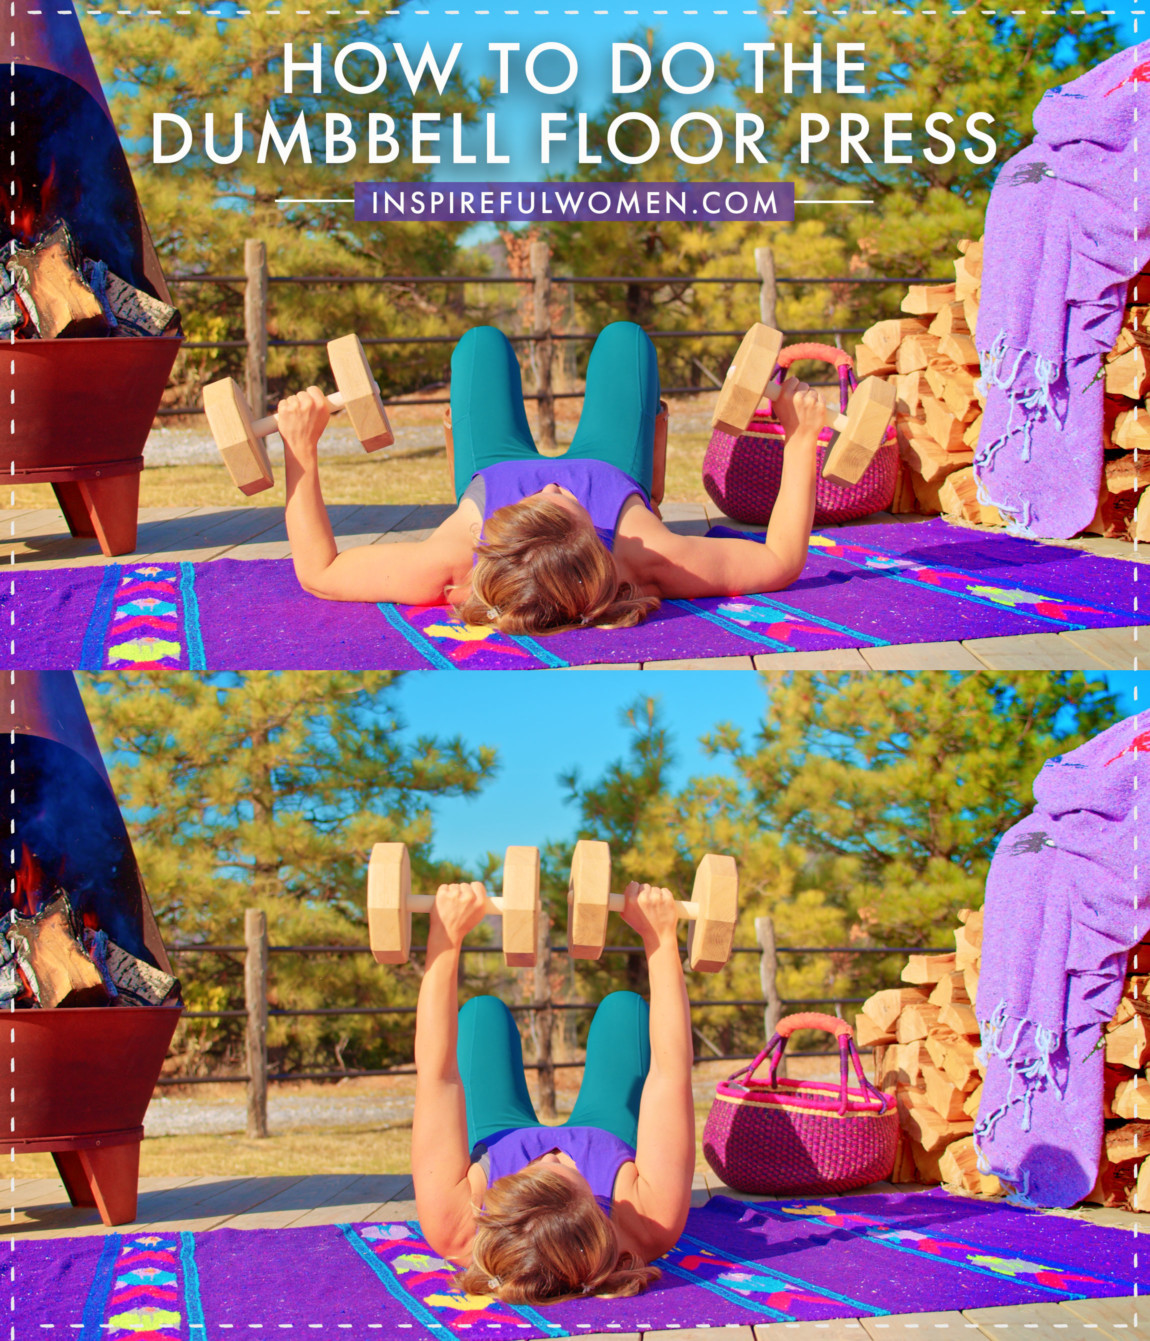 how-to-do-dumbbell-floor-chest-press-exercise-at-home-women-40-plus-tutorial